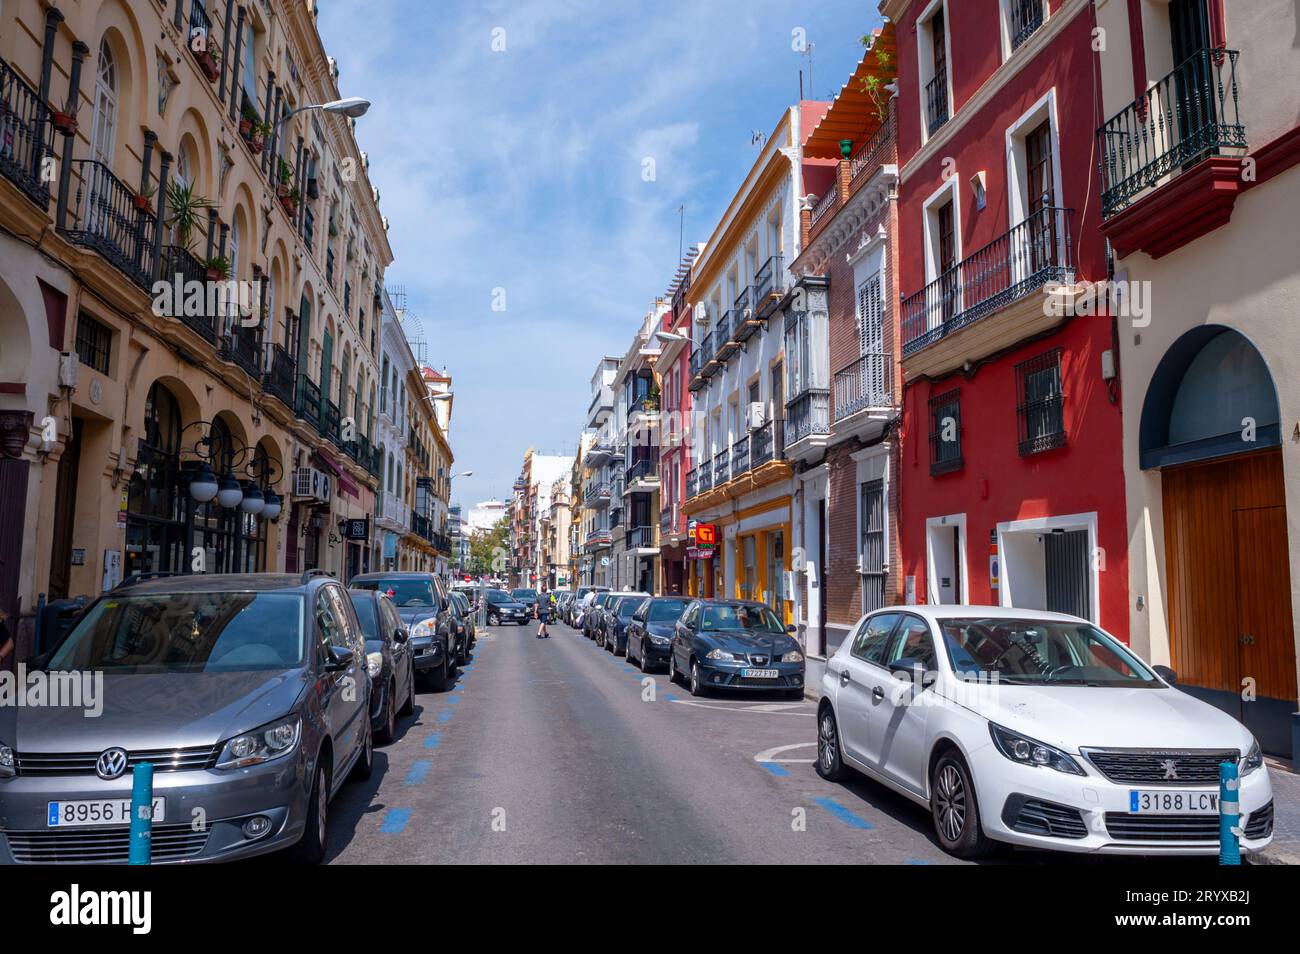 Seville Spain, Wide Angle View, Street Scene, Apartment Buildings, in Old Town Center, Parked Cars, facades Stock Photo